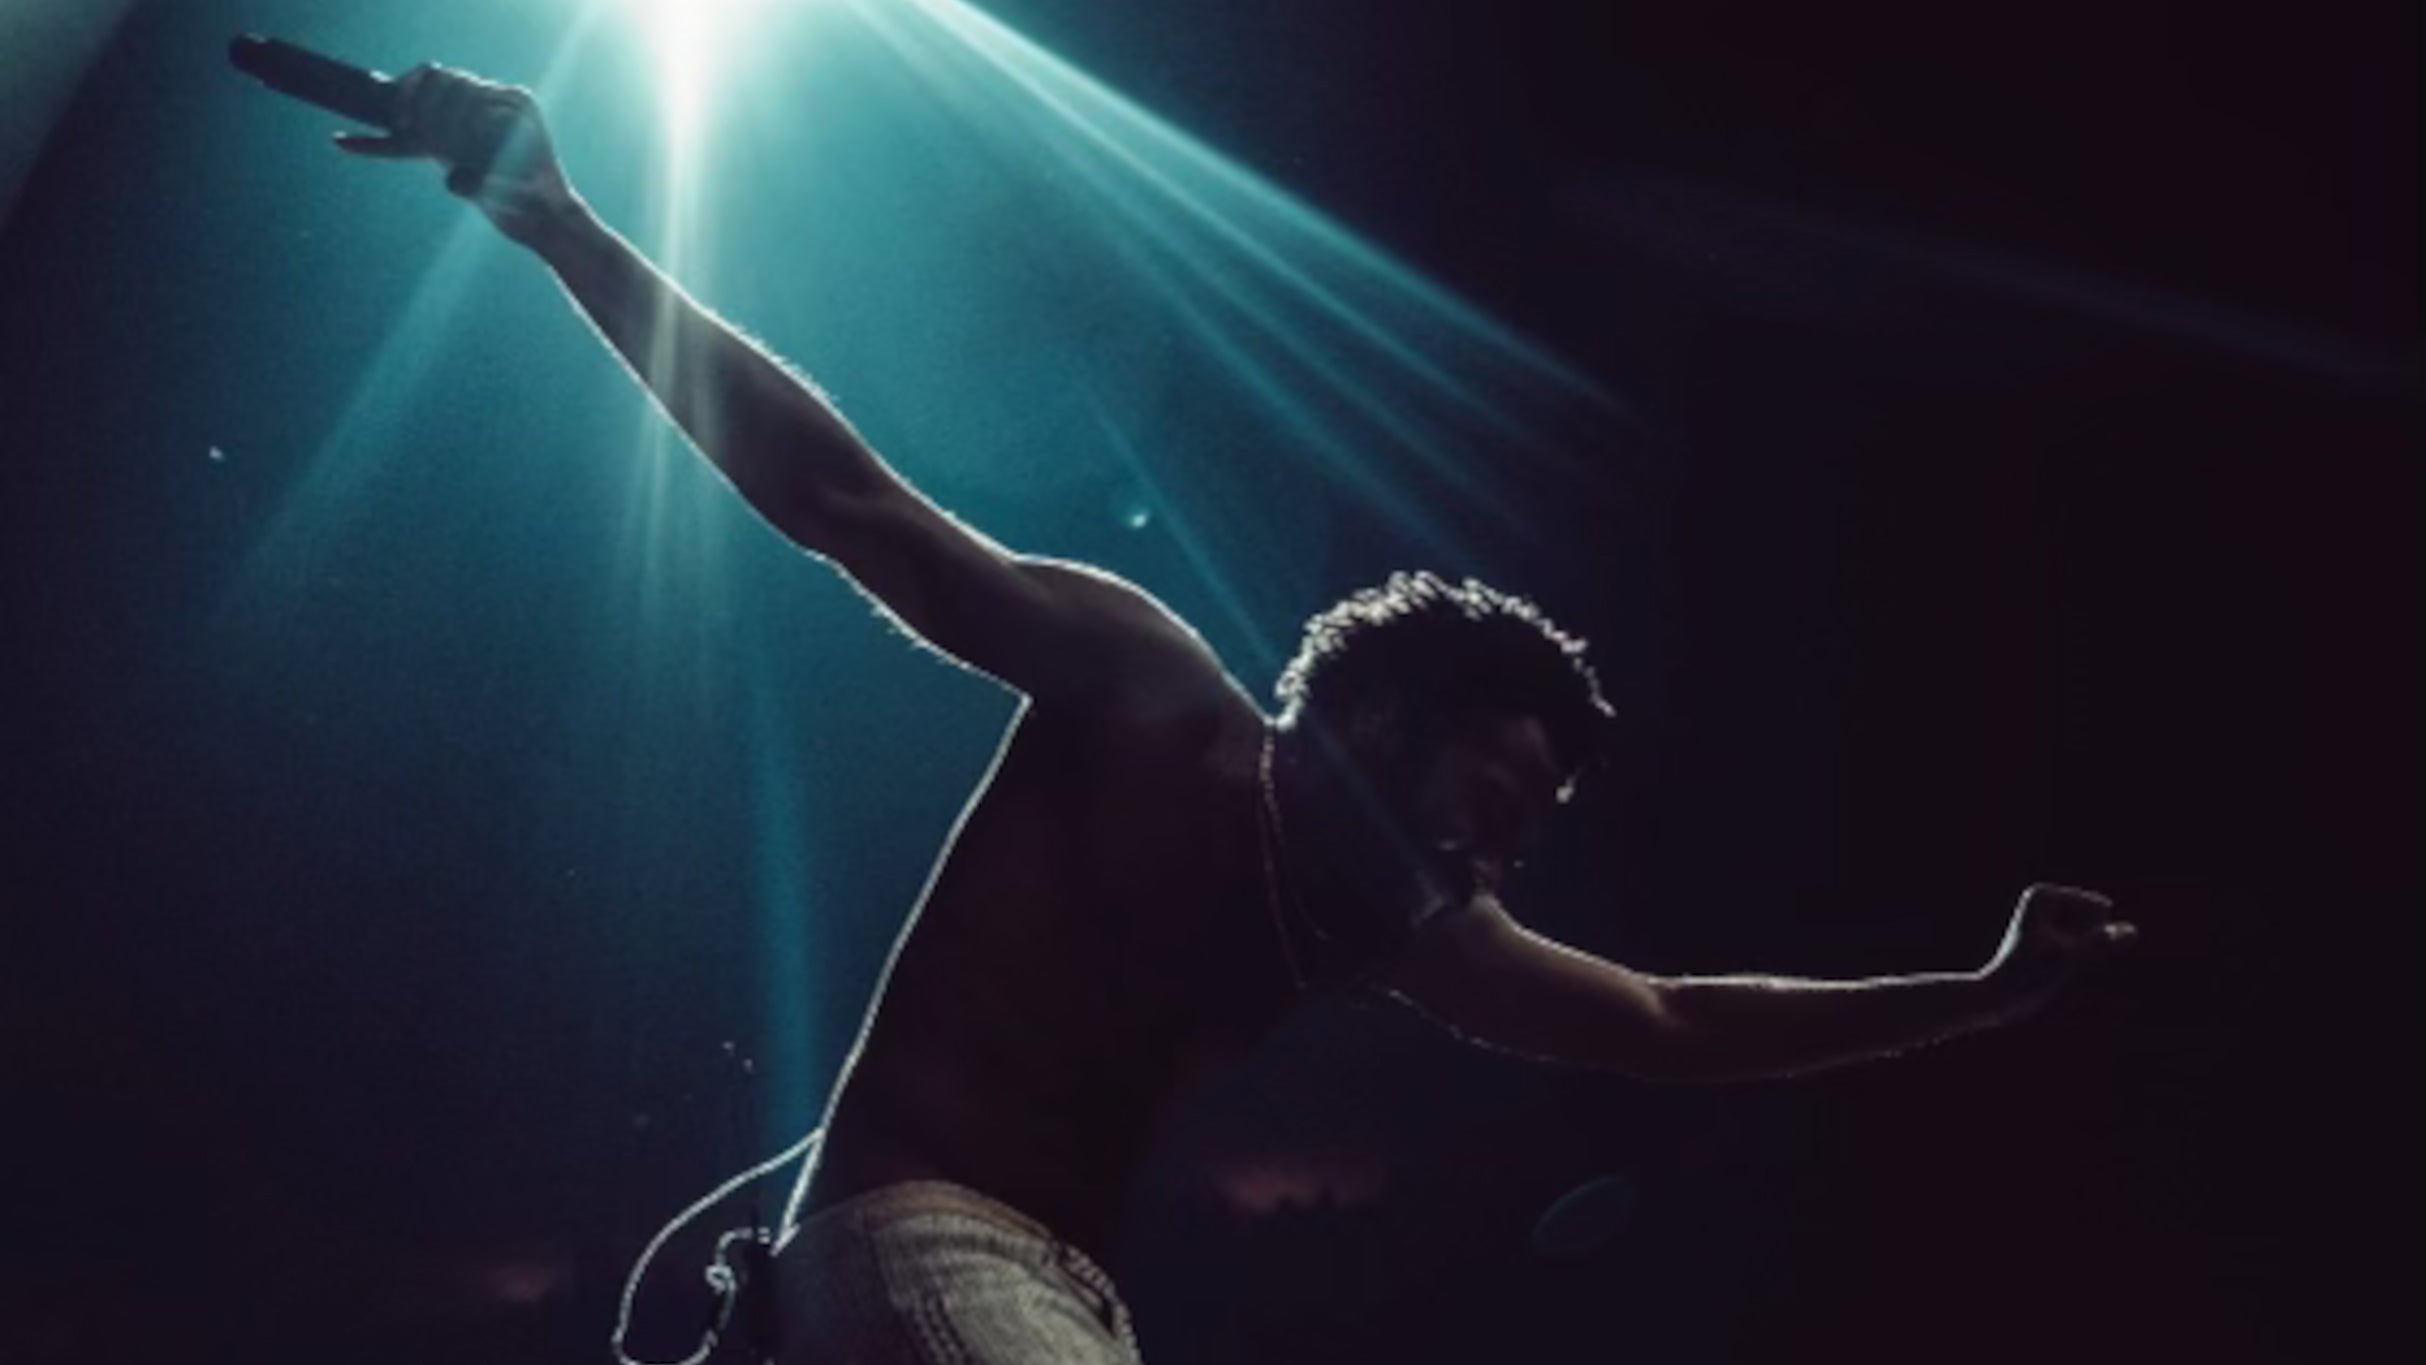 new presale c0de for Childish Gambino - The New World Tour affordable tickets in Austin